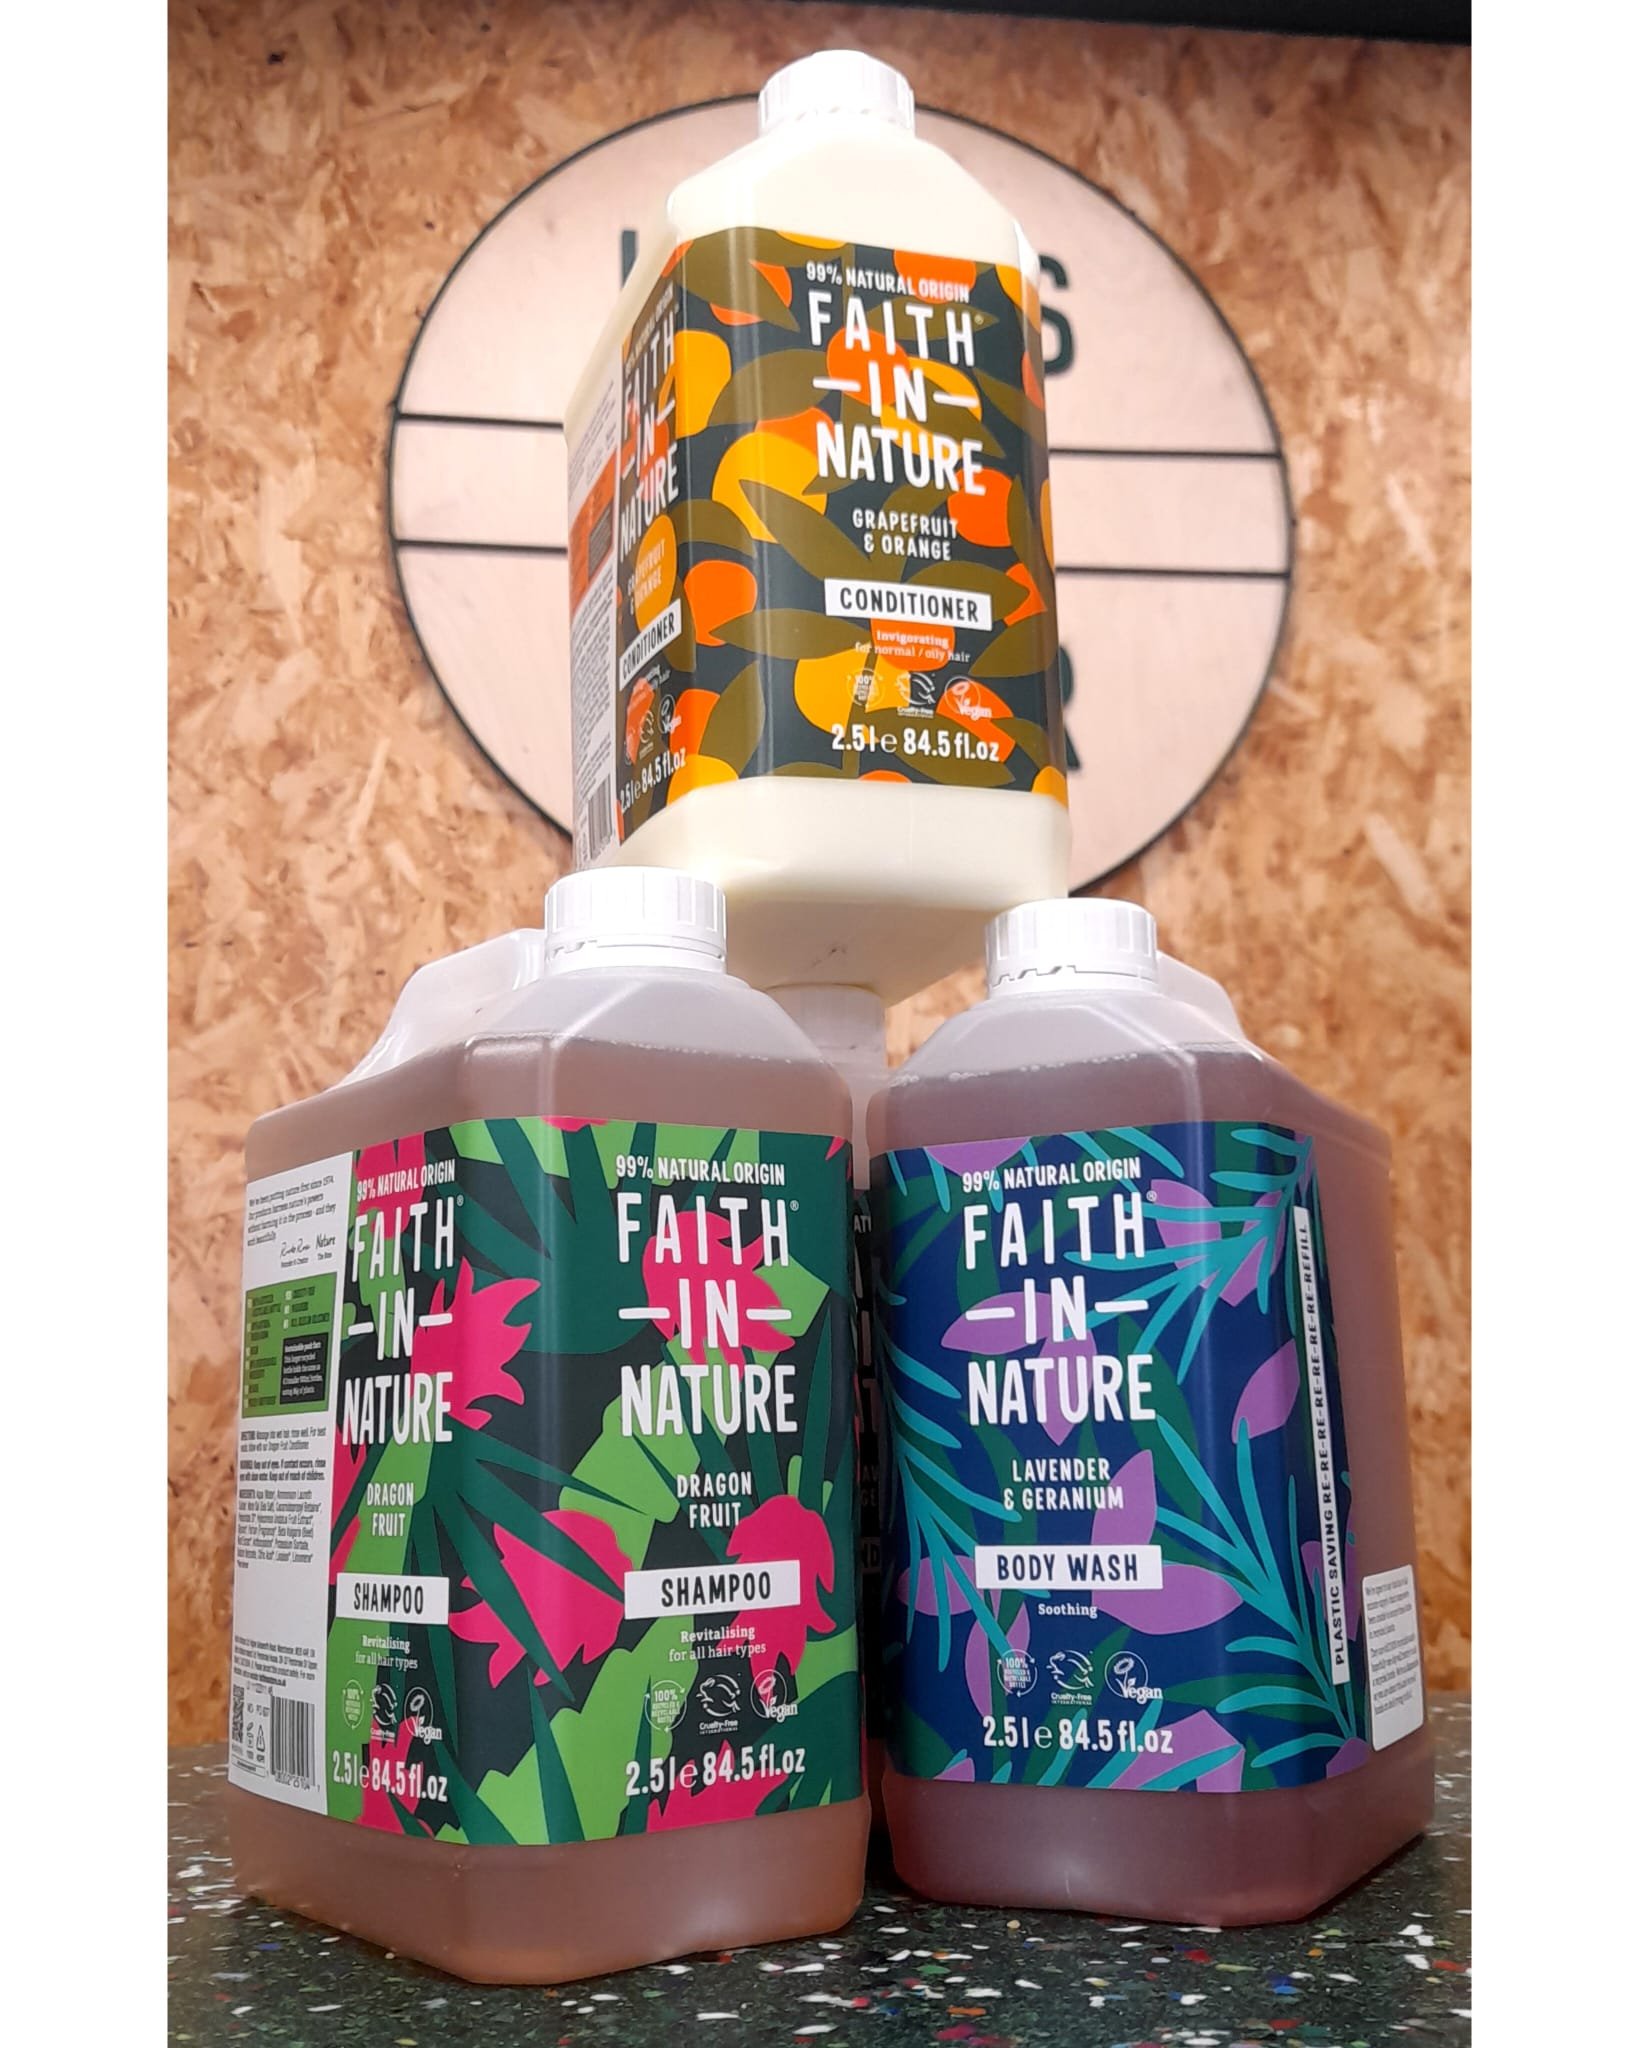 We have a new special offer within the ever popular @faithinnature_uk range. You can now stock up on selected favourite fragrances from Faith In Nature which are now available in 2.5L bottles at a knockdown price of &pound;22, which is just over 25% 